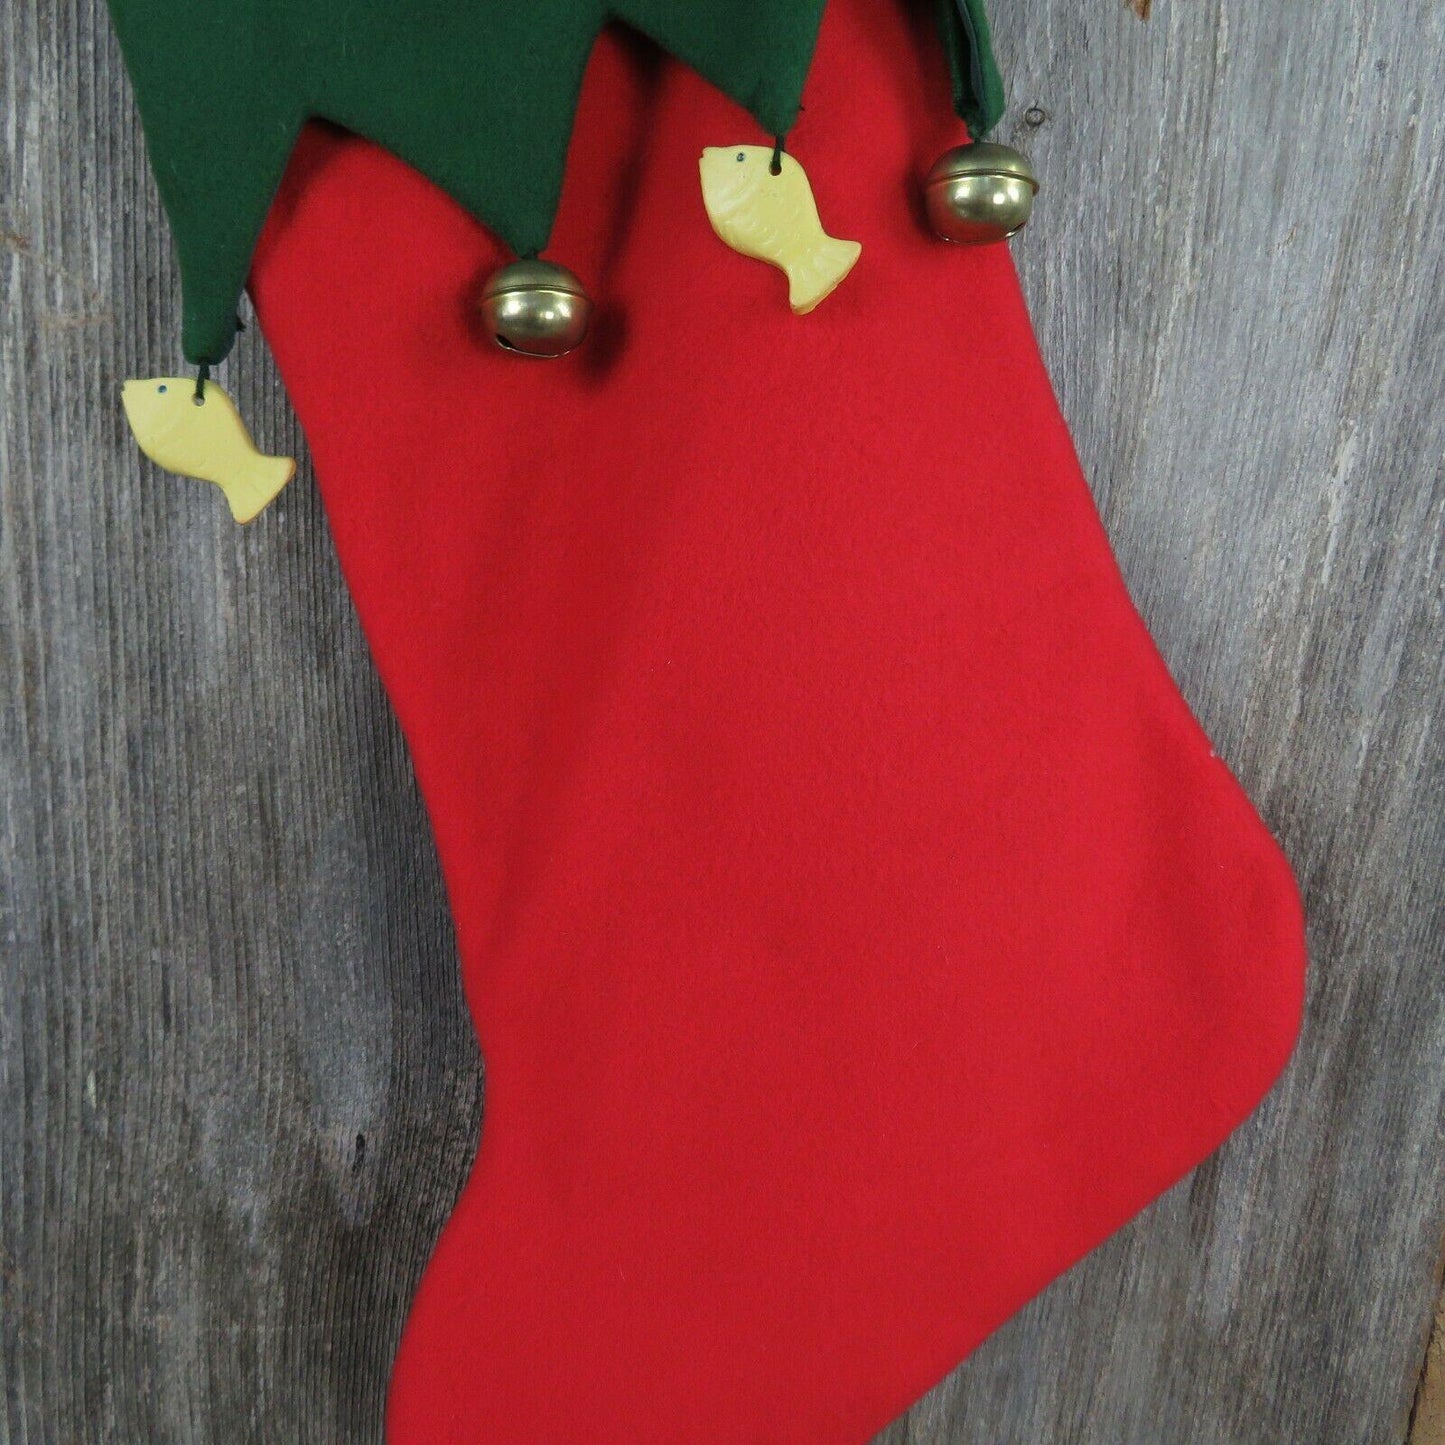 Nice Kitty Christmas Stocking Cat Mouse Fish Bells Fleece Green Red Pet